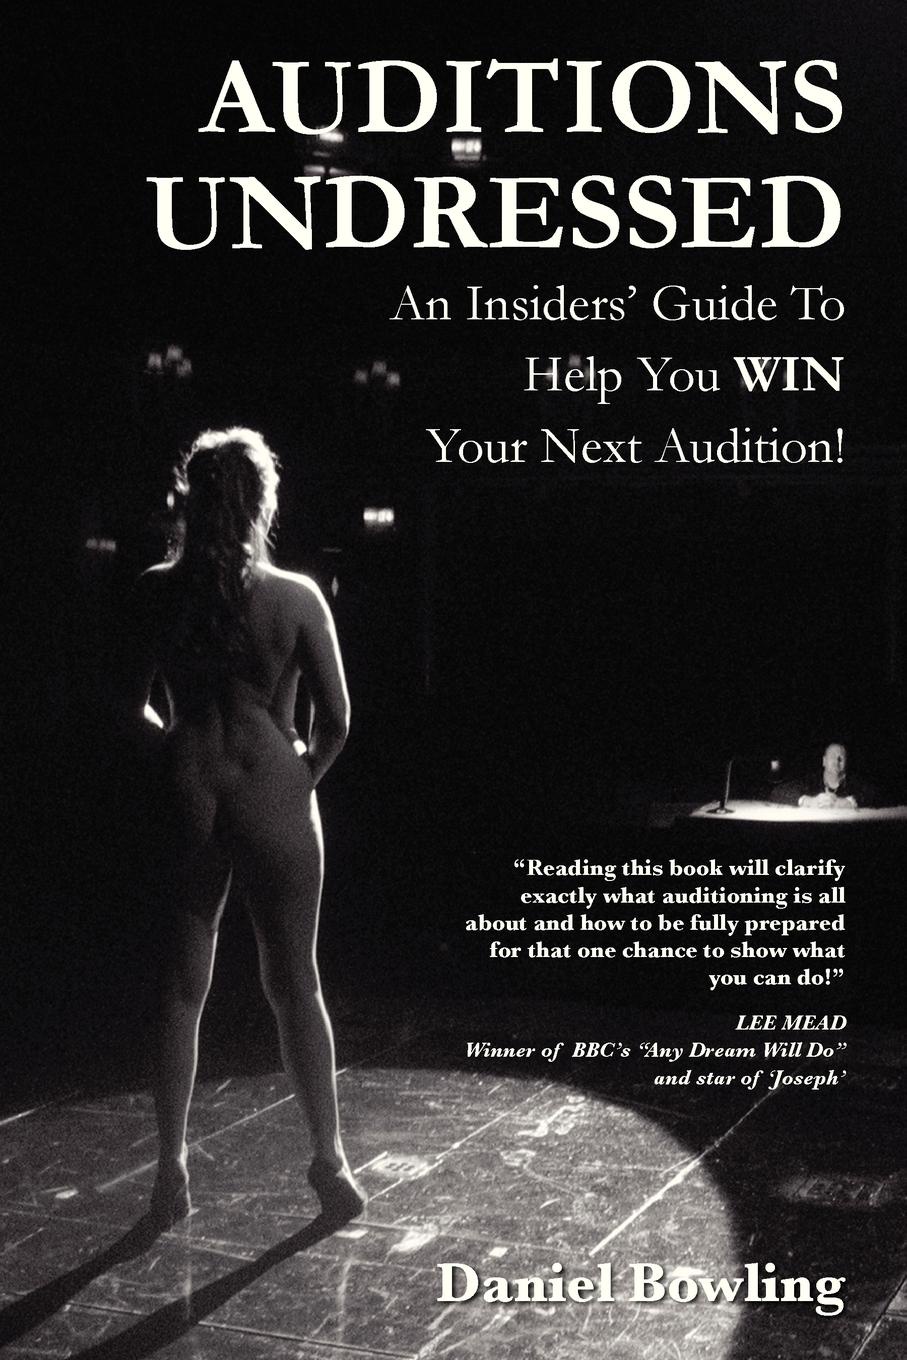 Auditions Undressed